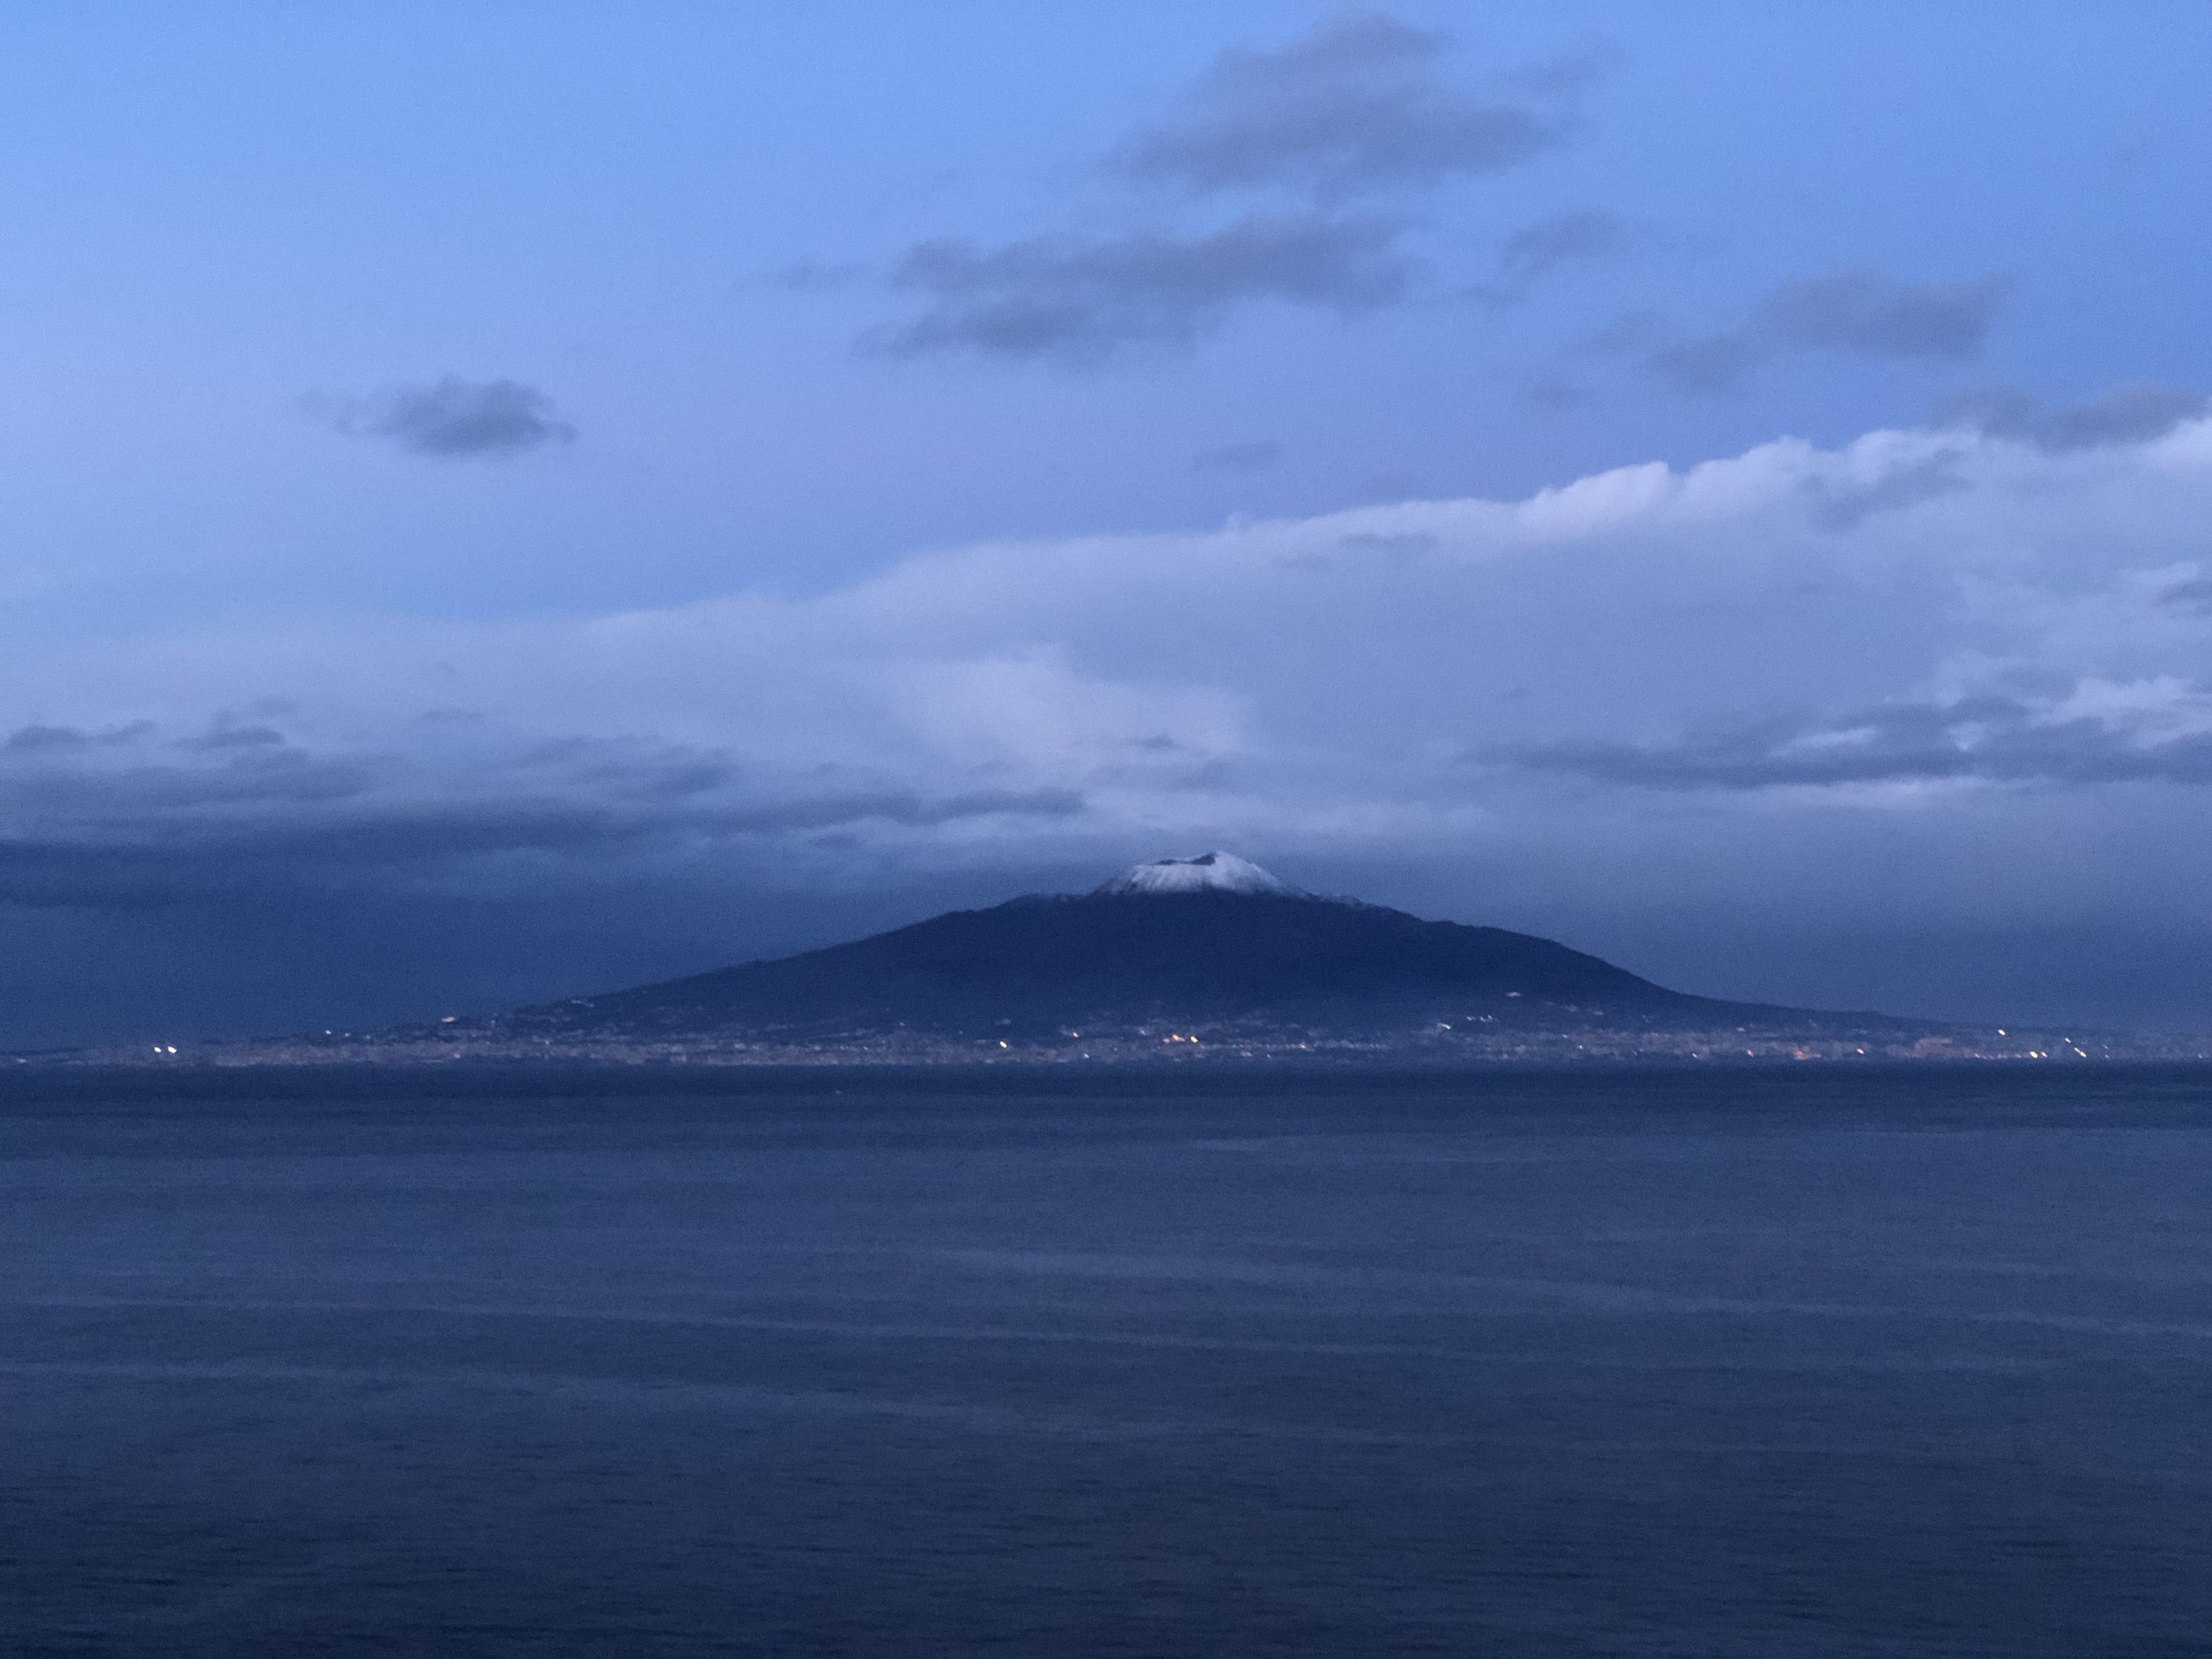 It's dusk, and across the Bay of Naples stands Mount Vesuvius. At the foot of the mountain a few scattered lights can be seen.